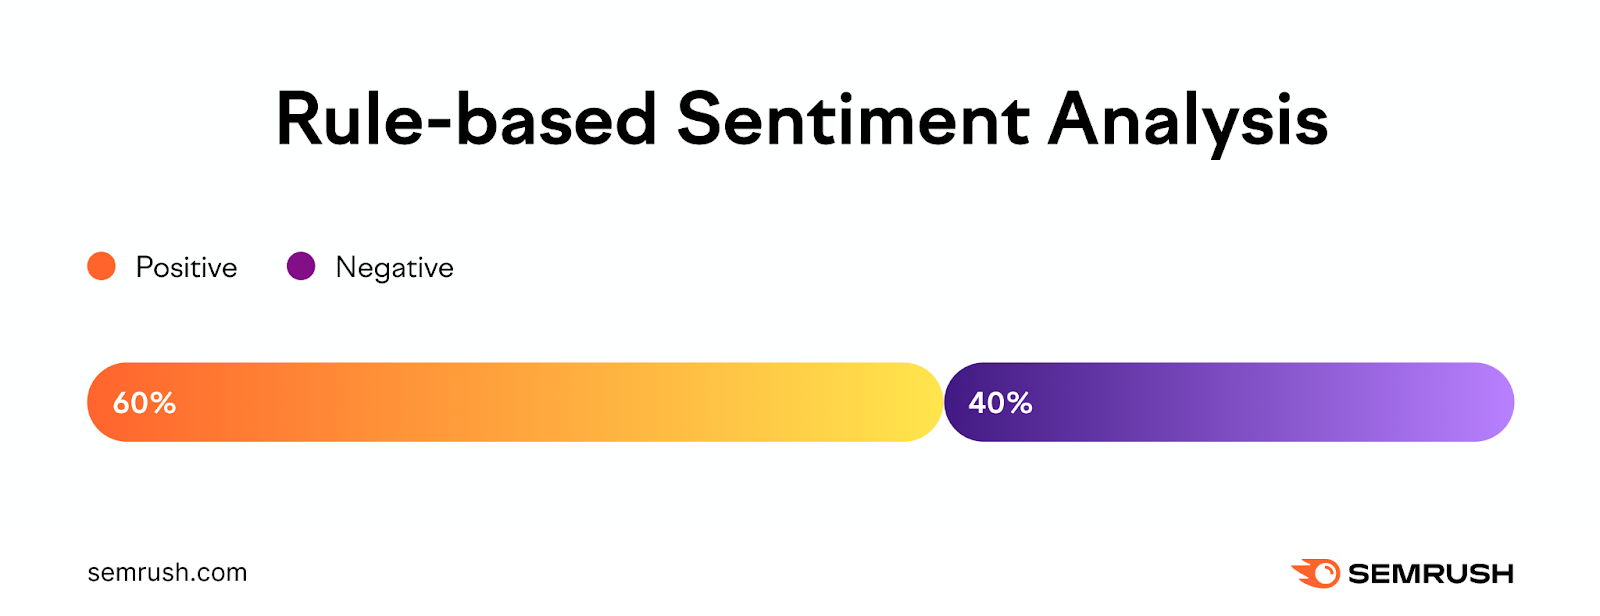 Rule-based sentiment ،ysis bar graph with 60% positive sentiment and 40% negative sentiment.